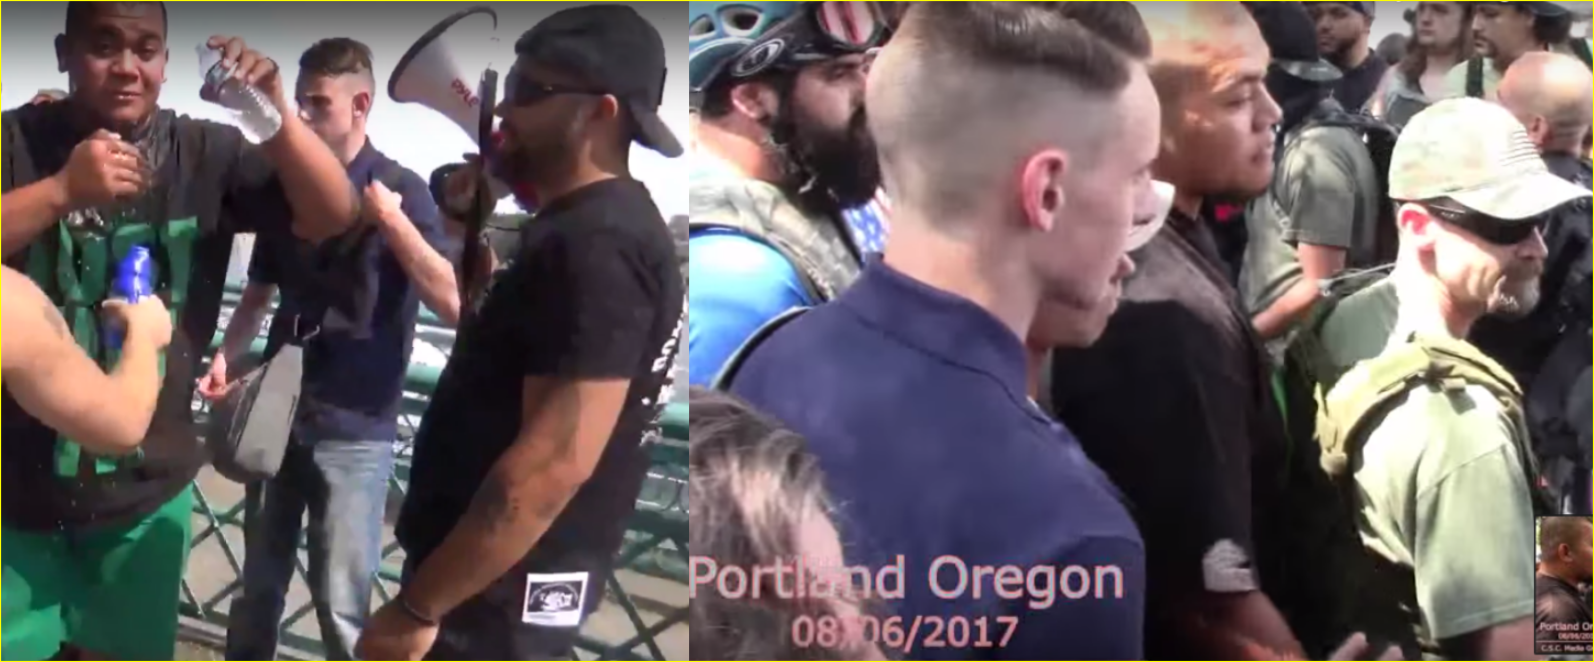 Tiny Toese with fascists at a Patriot Prayer rally